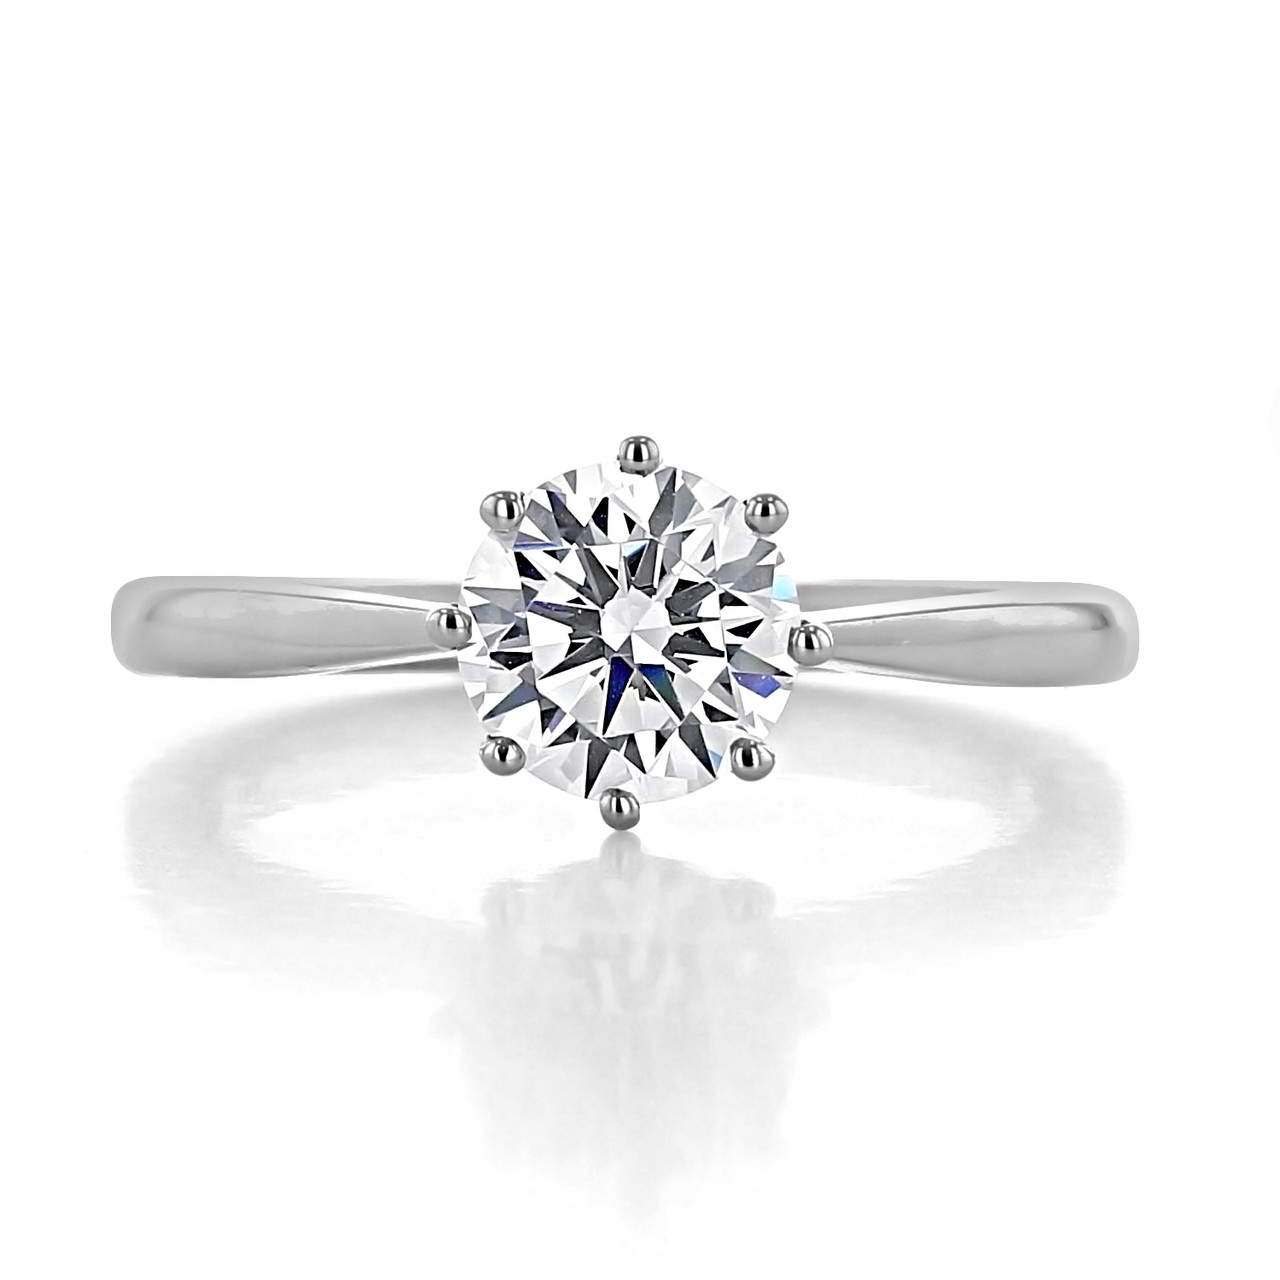 The Top Six Reasons to Purchase a Platinum Engagement Ring